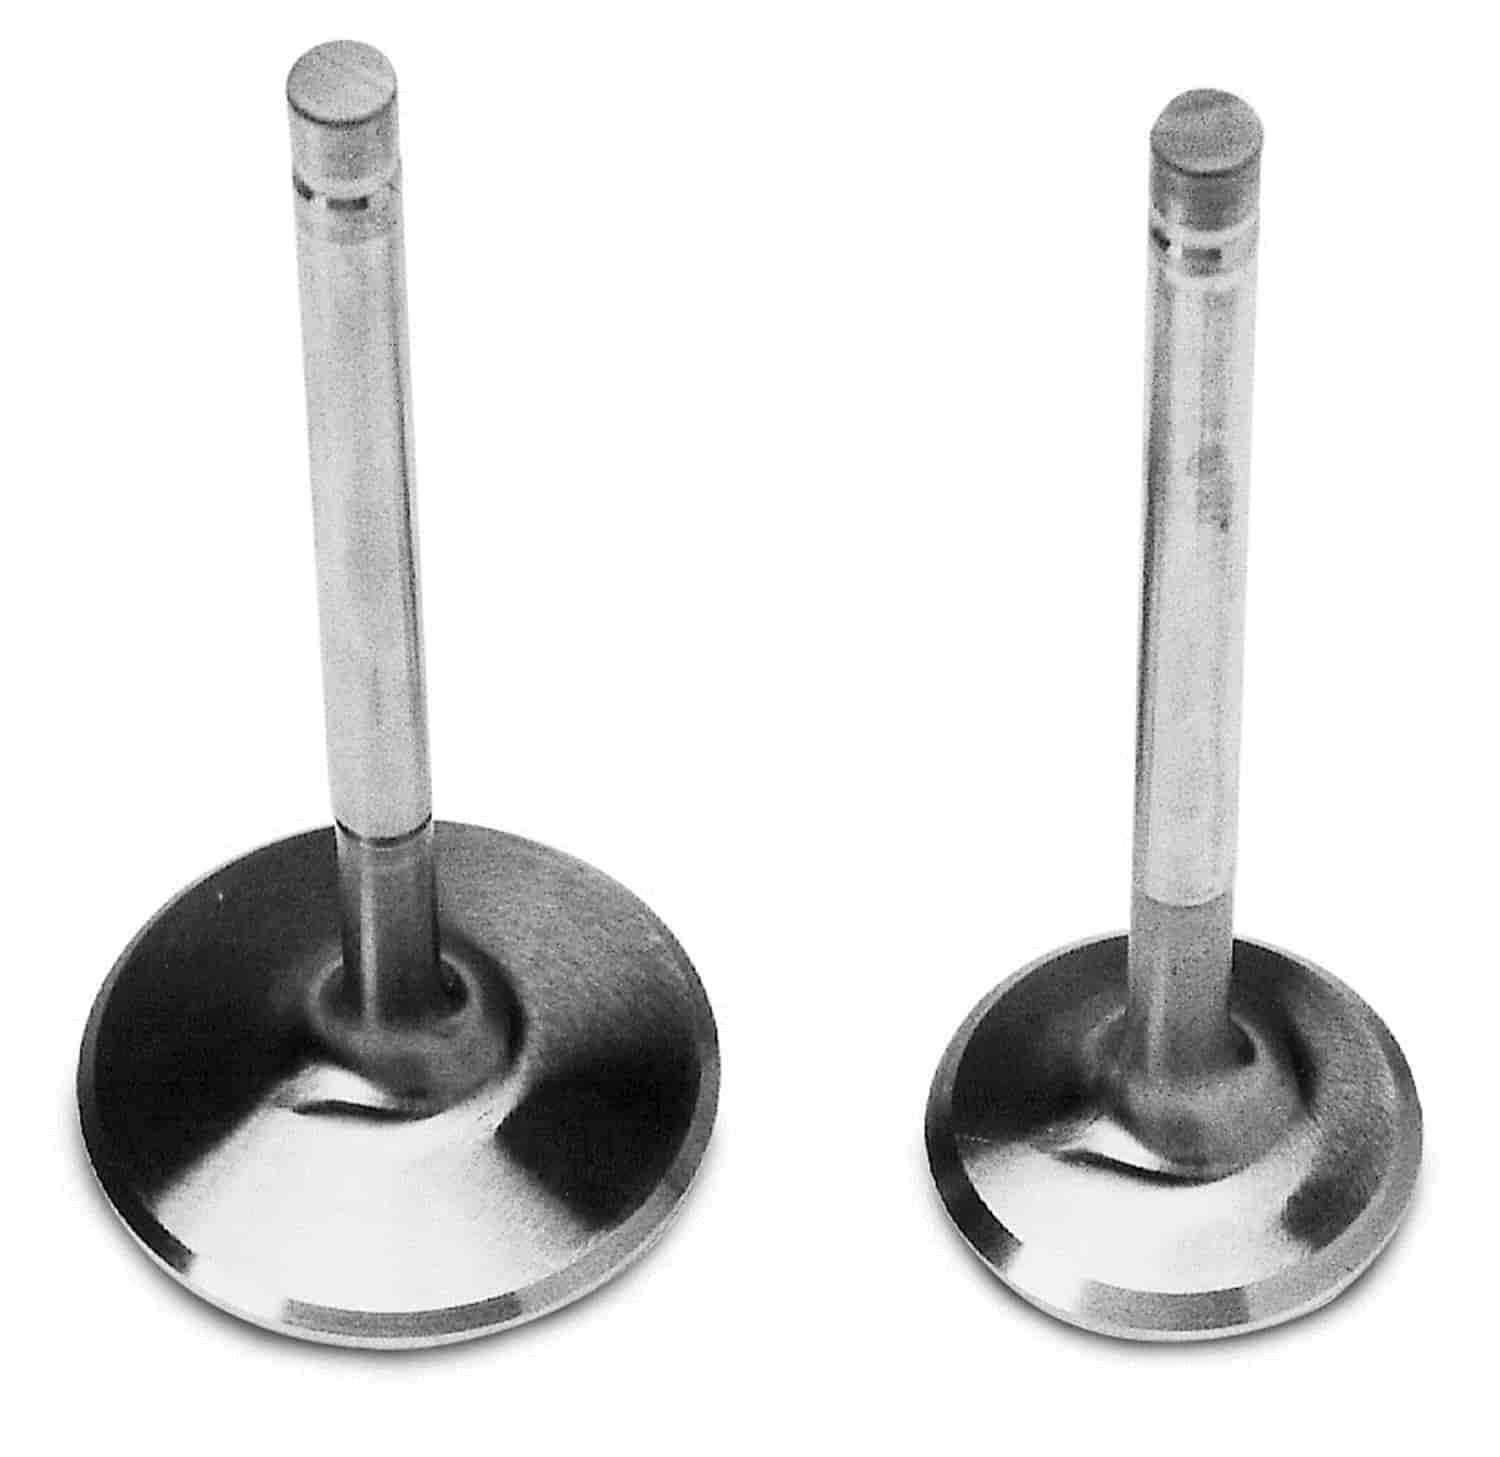 Intake Valve Set 2.09" for Ford FE Performer RPM Heads #350-60069 & 350-60079